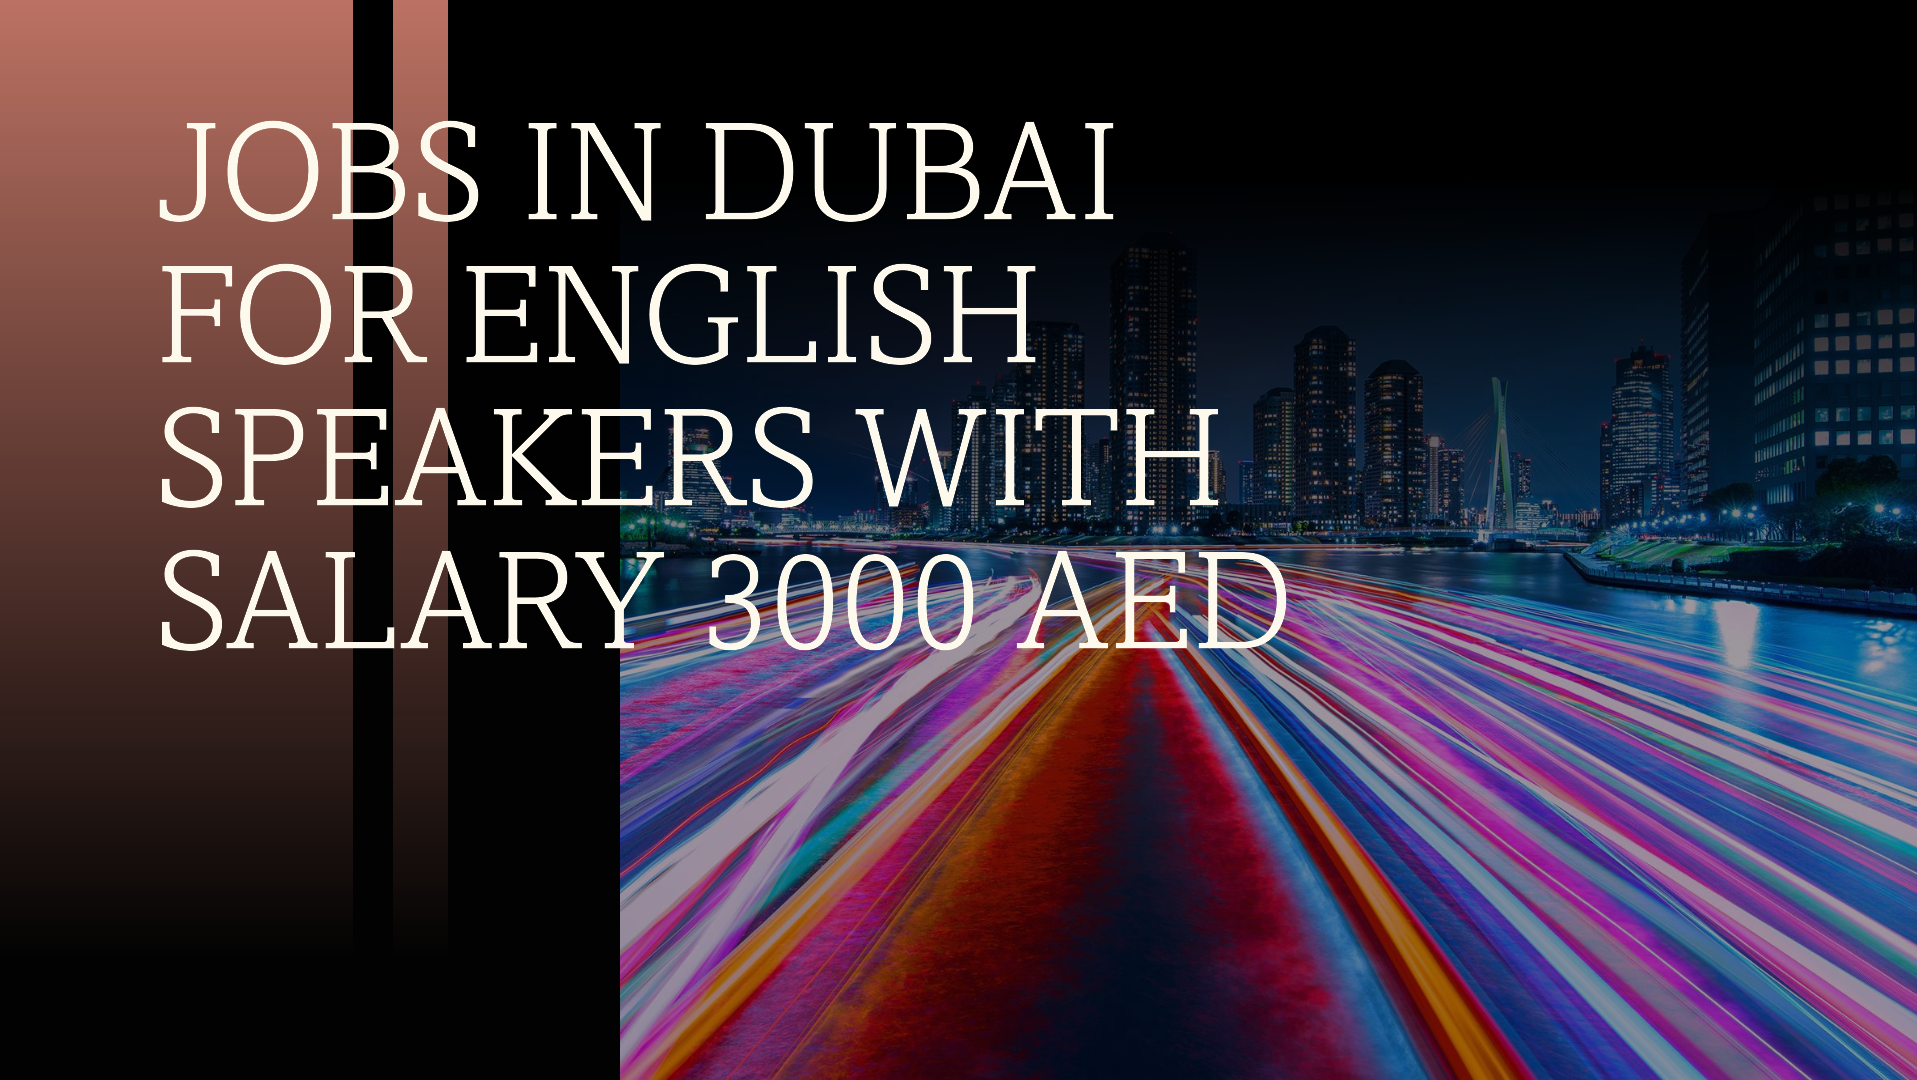 Jobs in Dubai for English speakers with salary 3000 AED